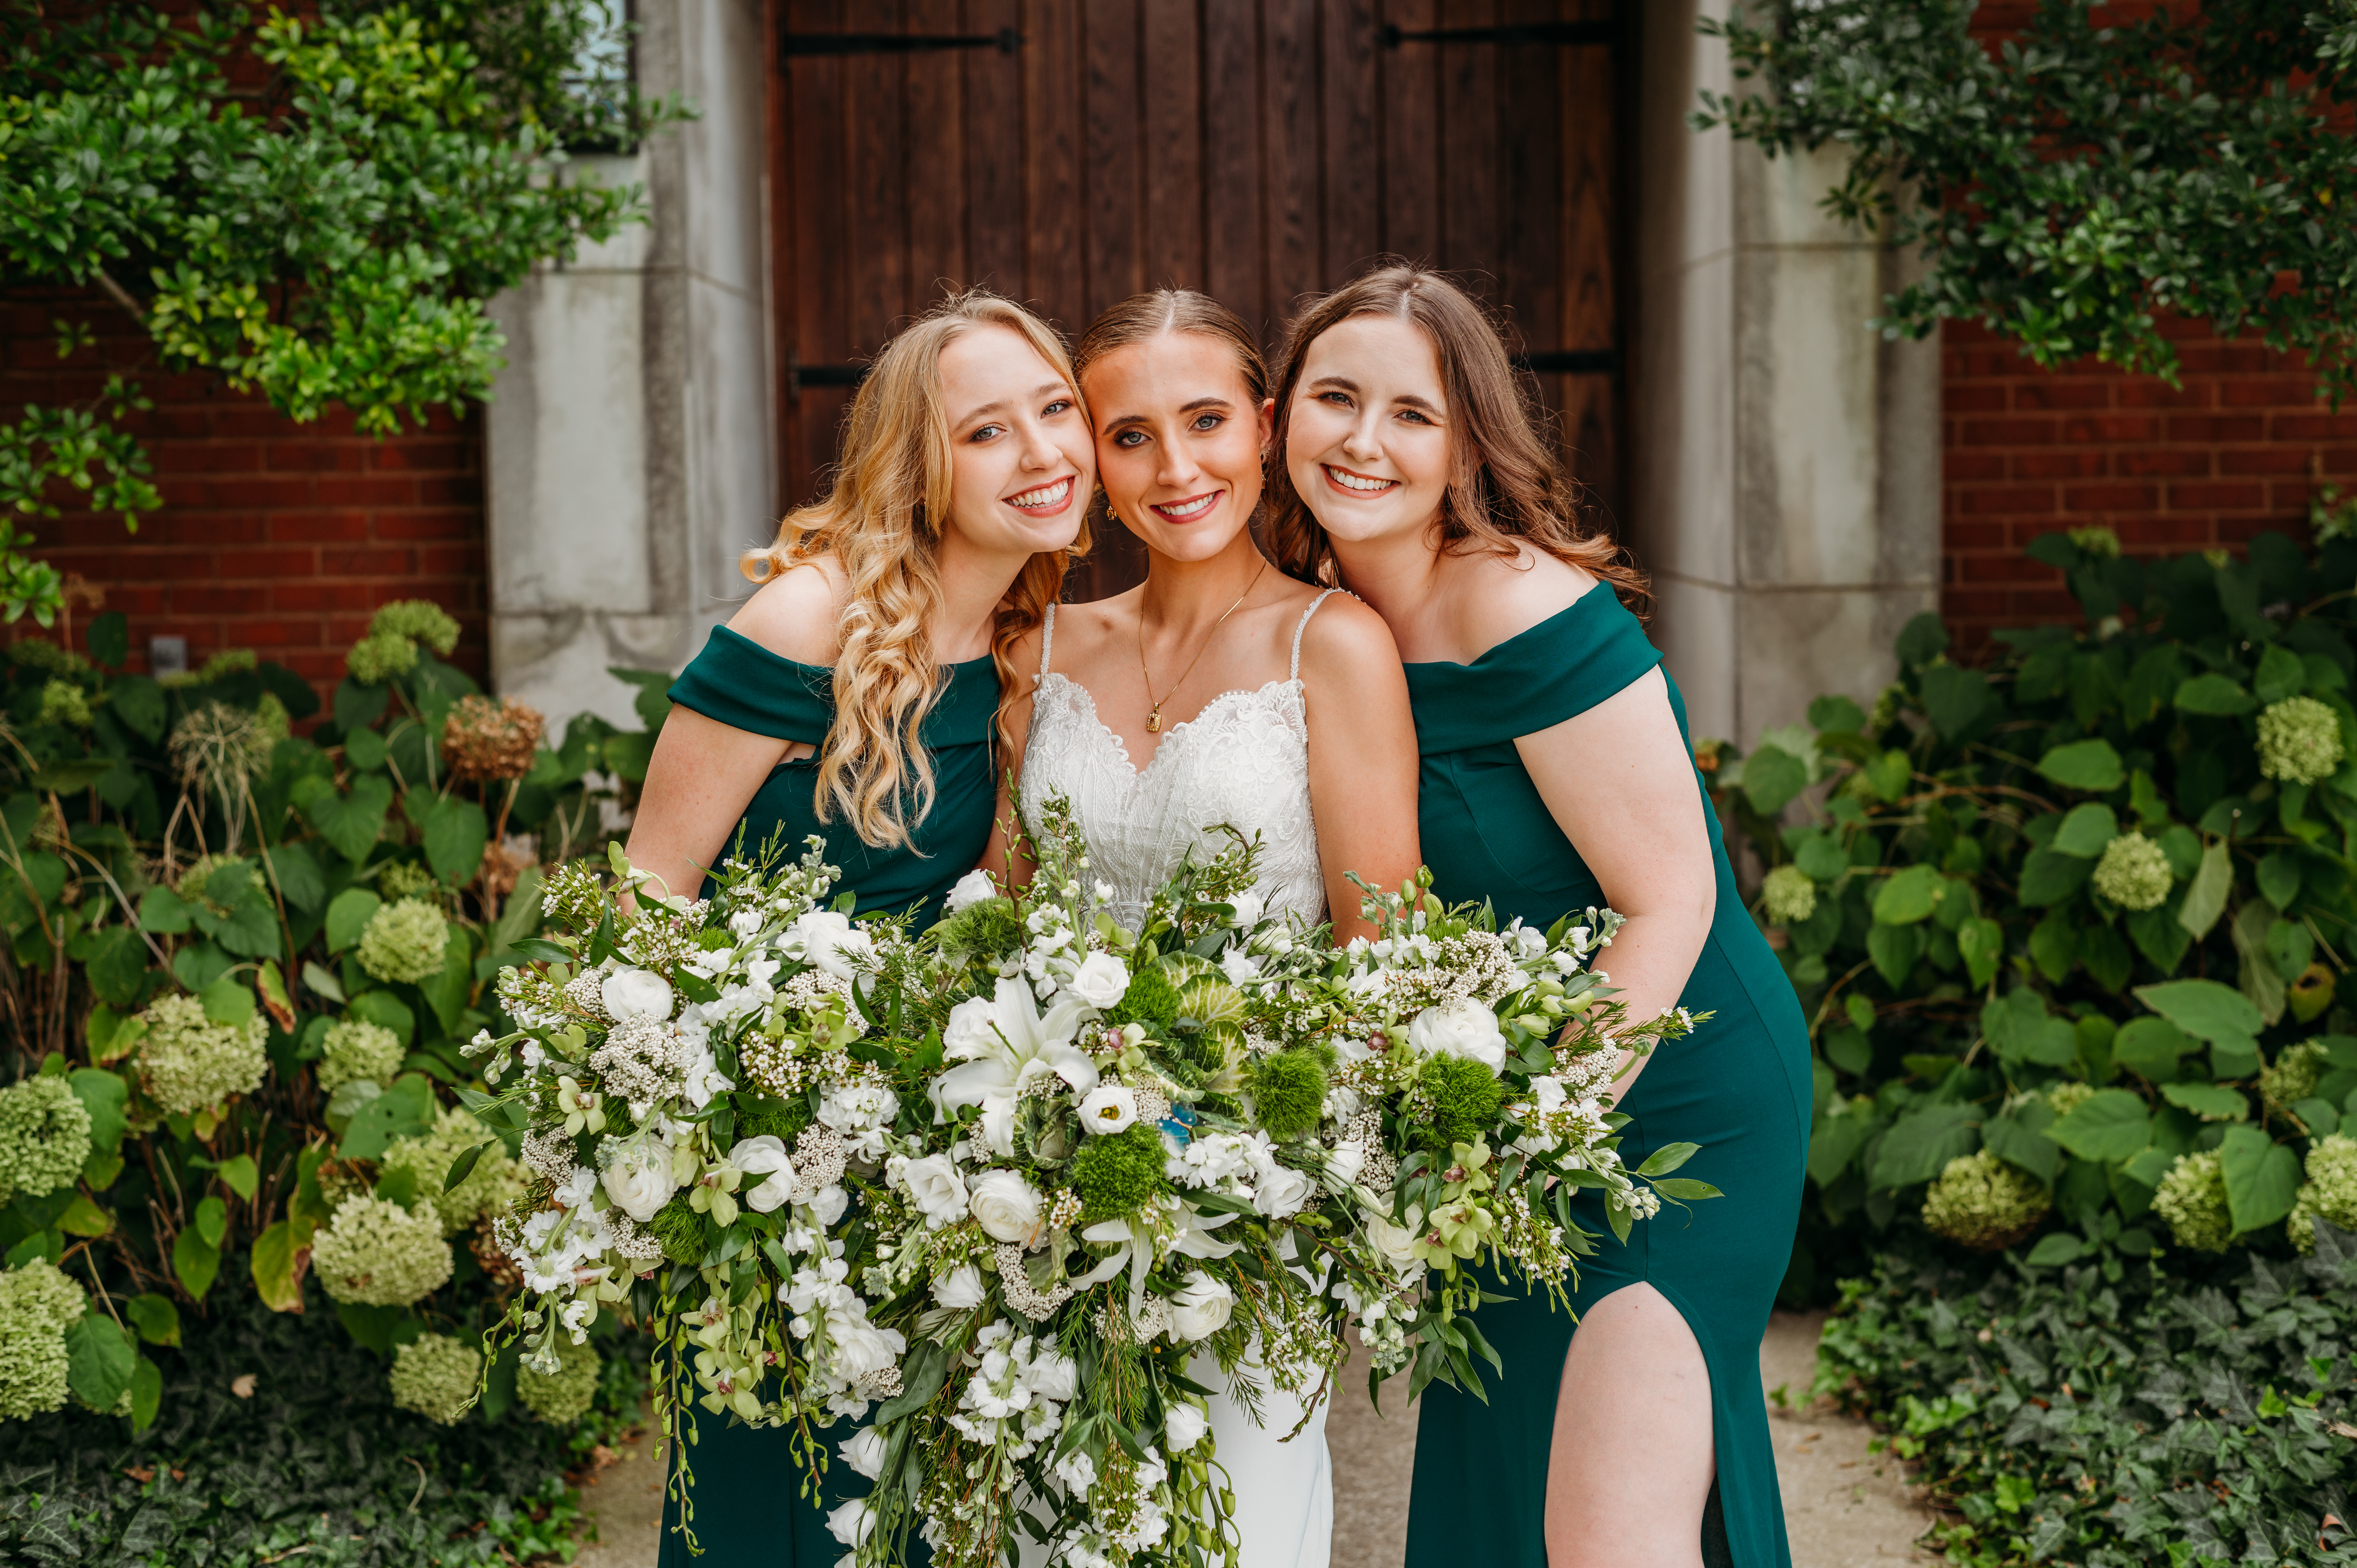 Nashville Wedding with Wedding Dress from Couture by Tess Bridal